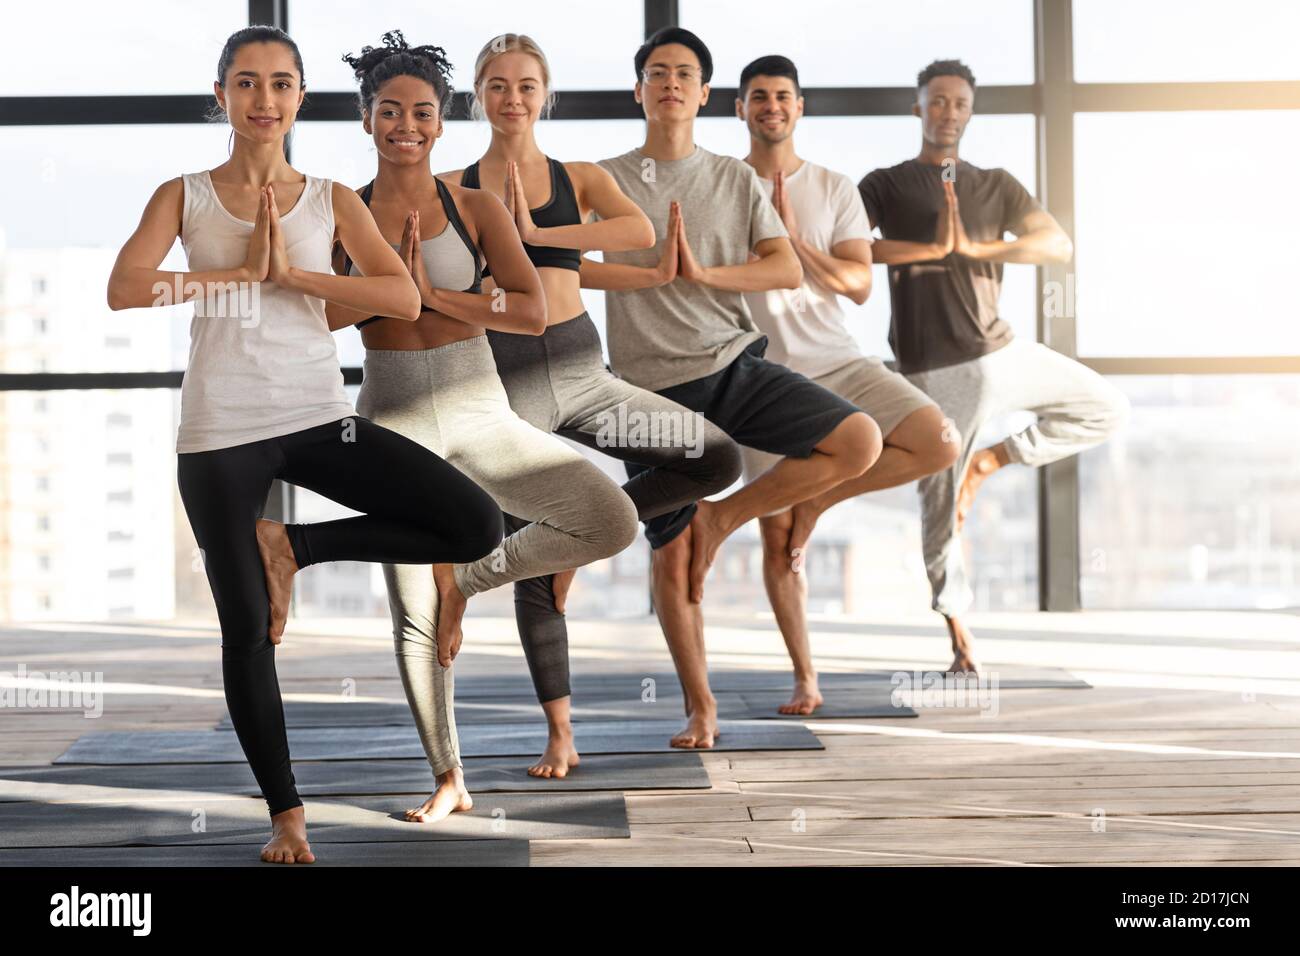 Group of Young People Practice Yoga Together Stock Image - Image of health,  flexibility: 193102427